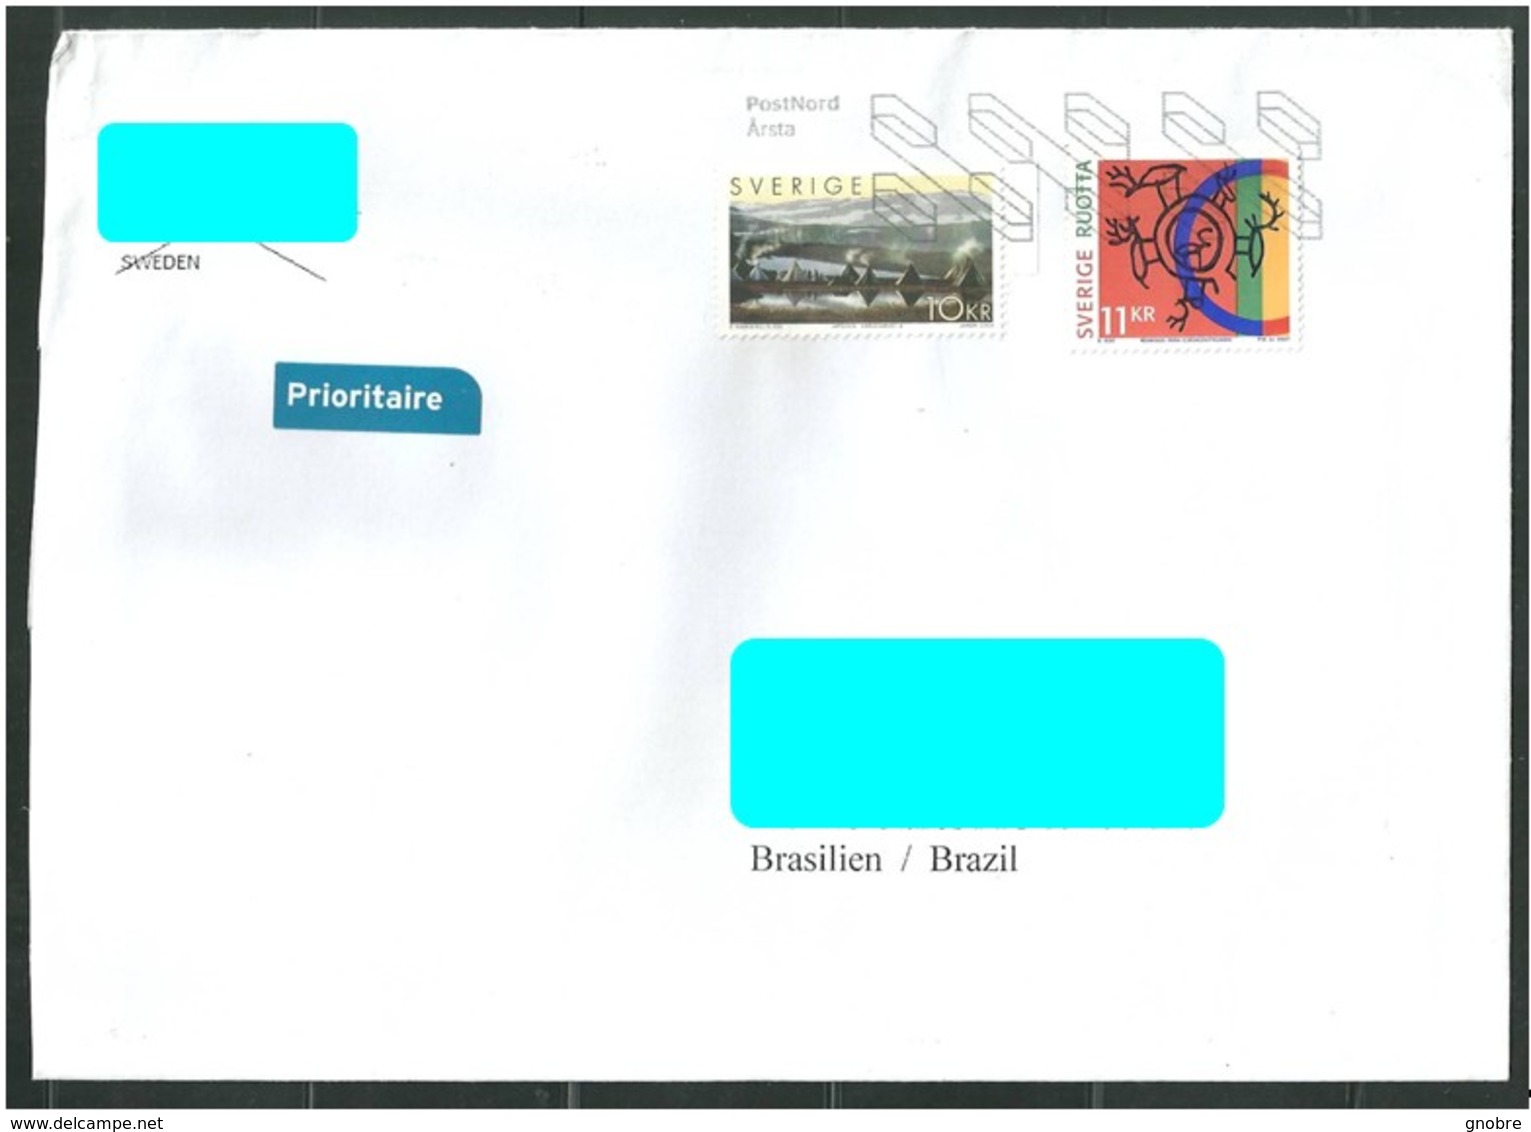 SWEDEN To Brazil Cover Sent In 2018? With 2 Topical Stamps And Beautiful Cancel Mark (GN 0117). - Cartas & Documentos